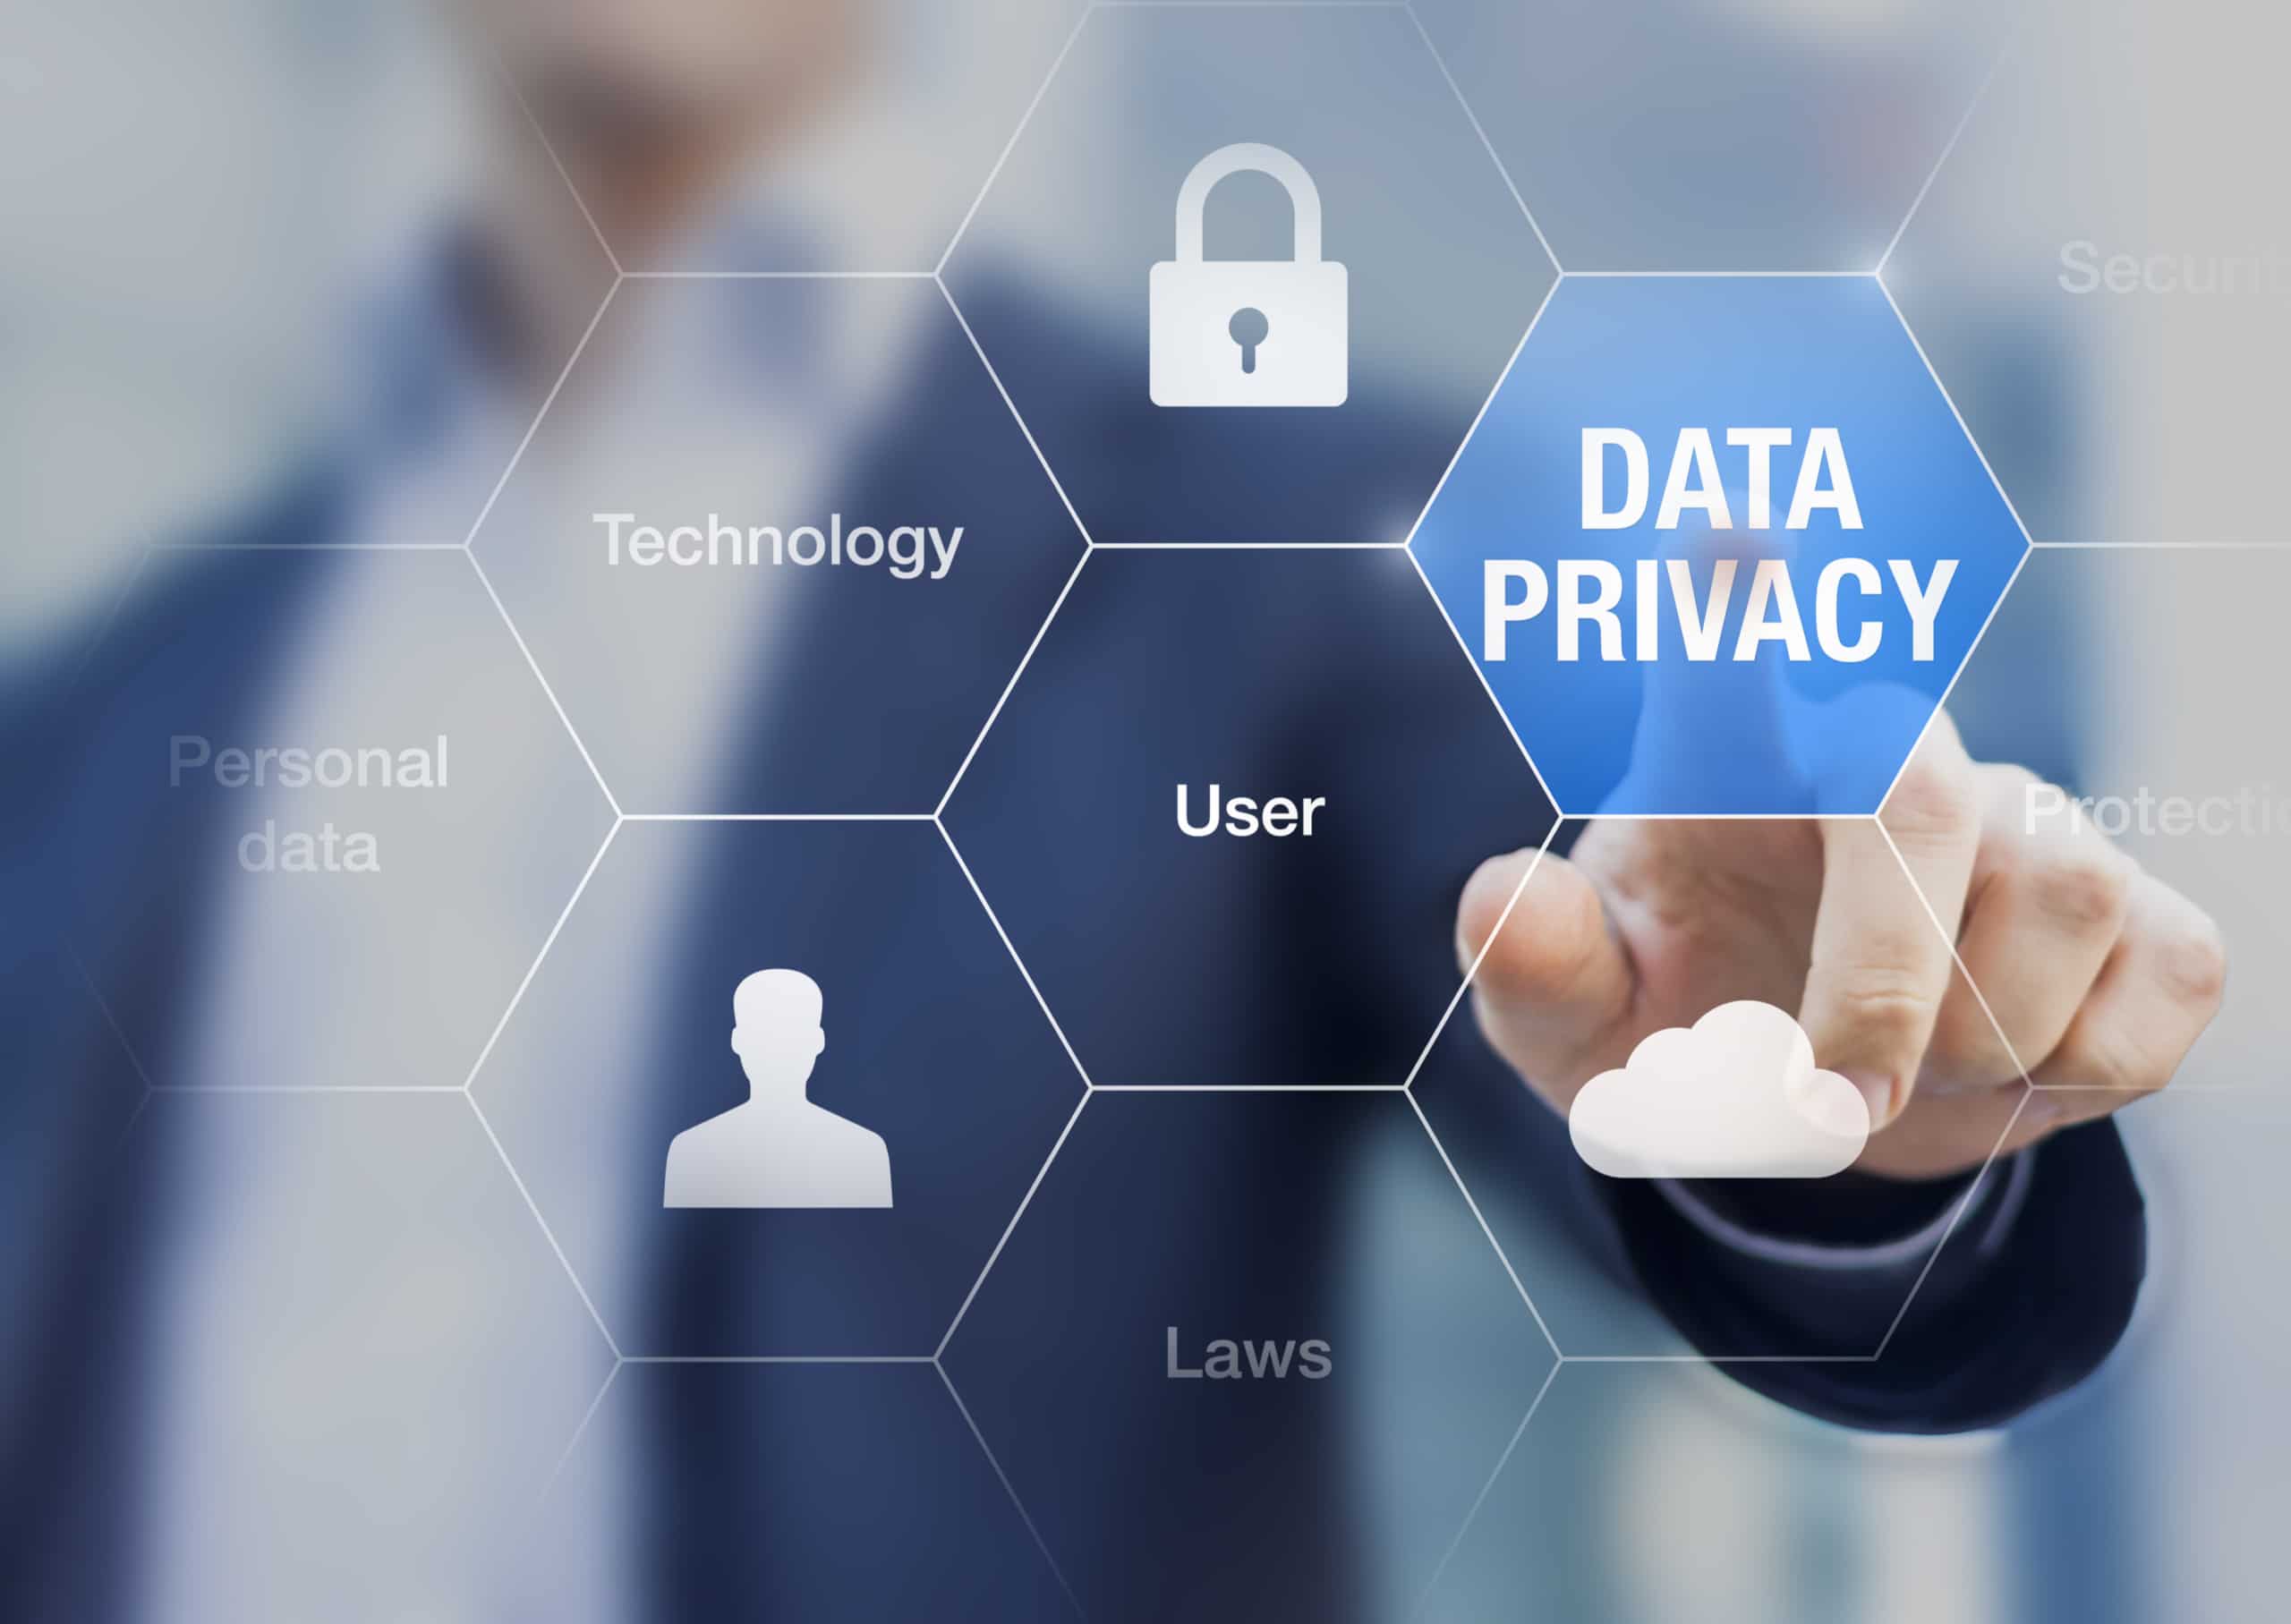 Who Is Responsible For Data Privacy?